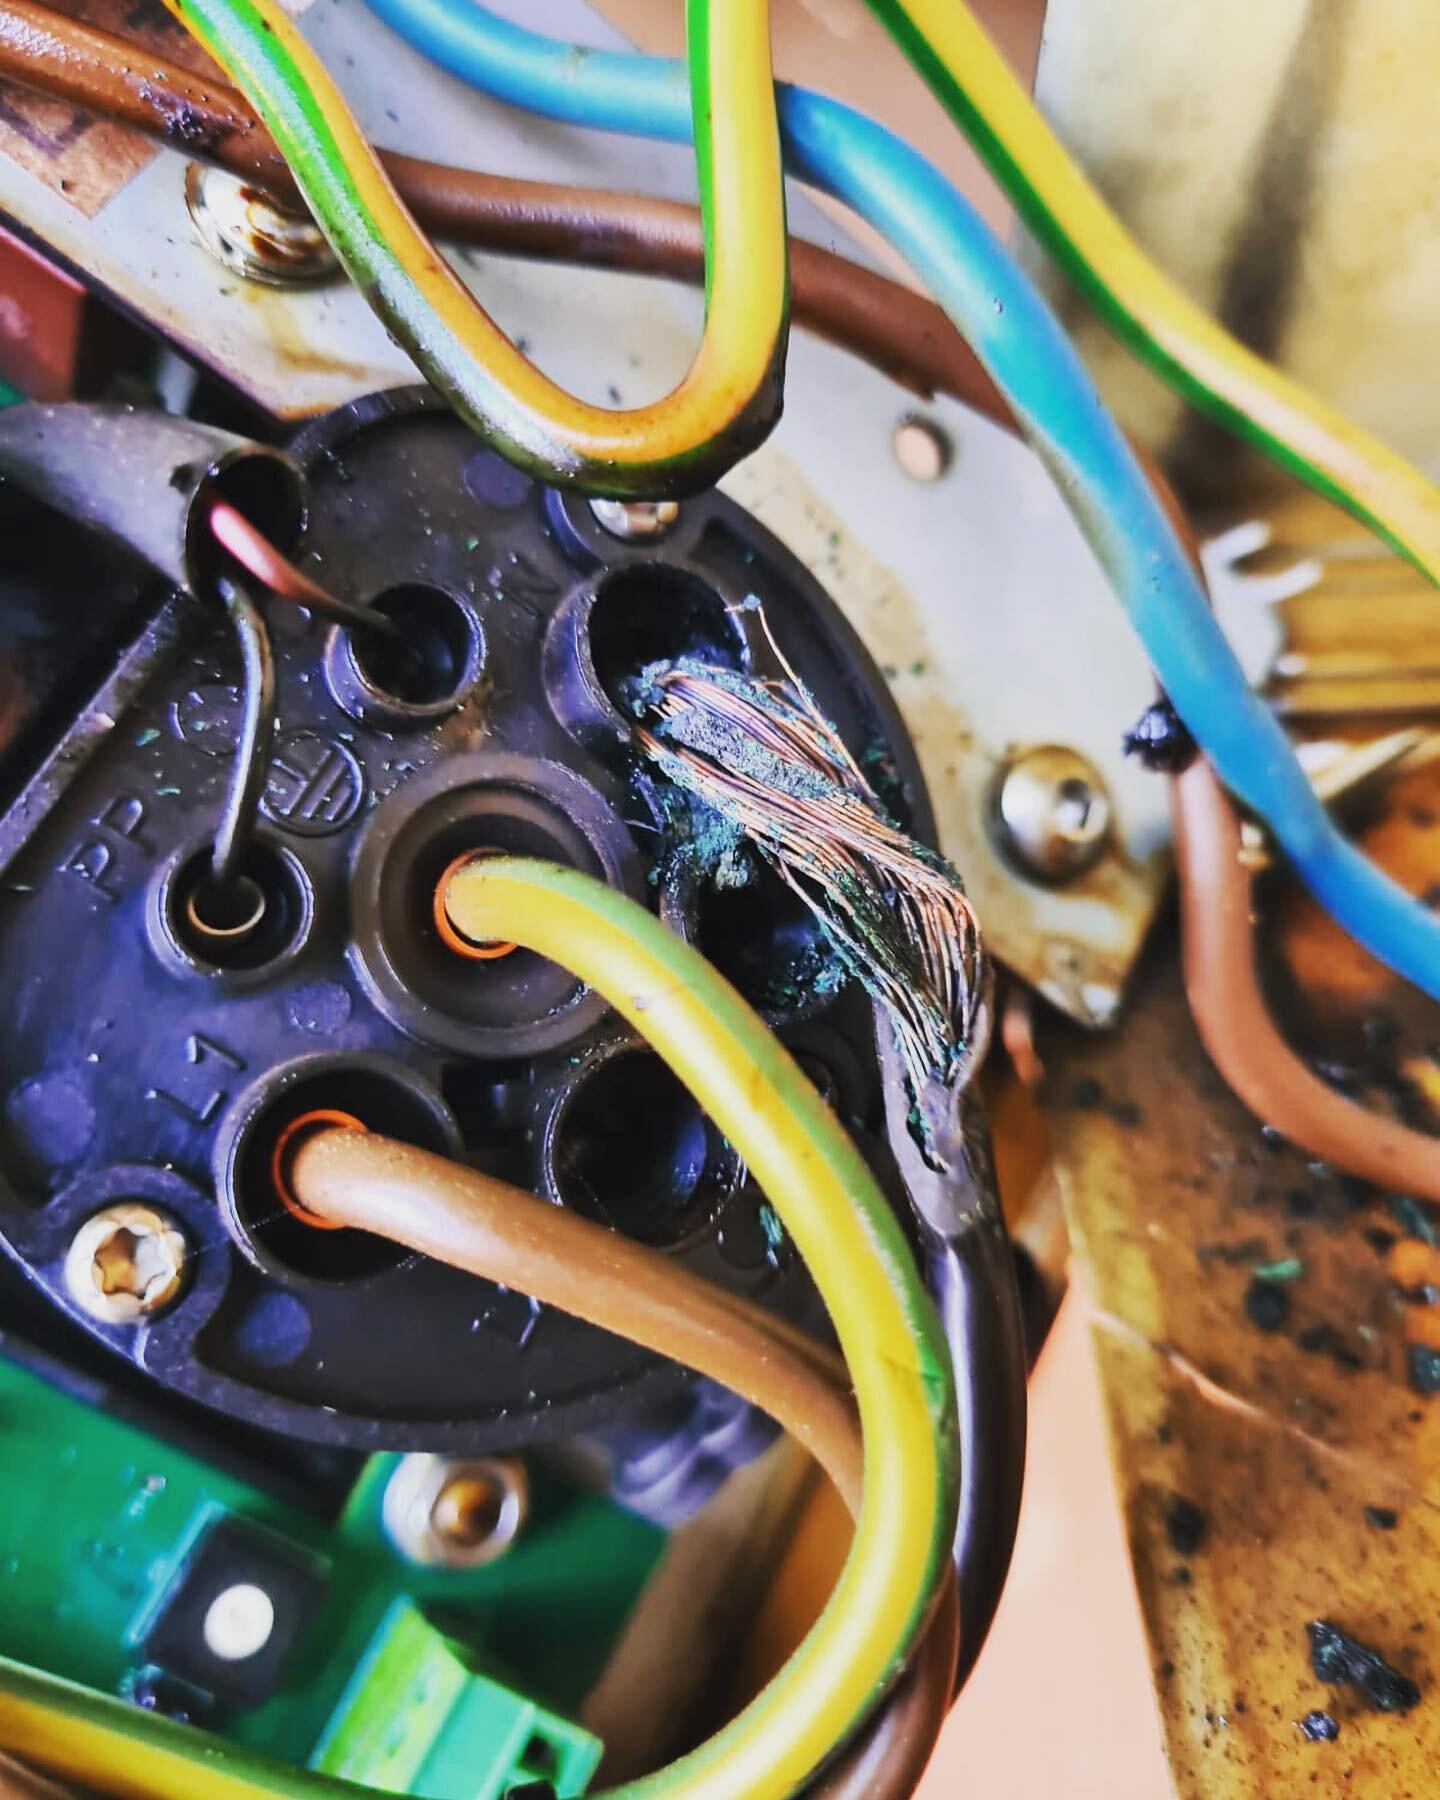 Another day, another electrical connection that need fixing!
#electricalengineering#electricalcontractor#suffolkelectrician#wiring#electrician#electrical#eastgreenelectrical#wire#contractor